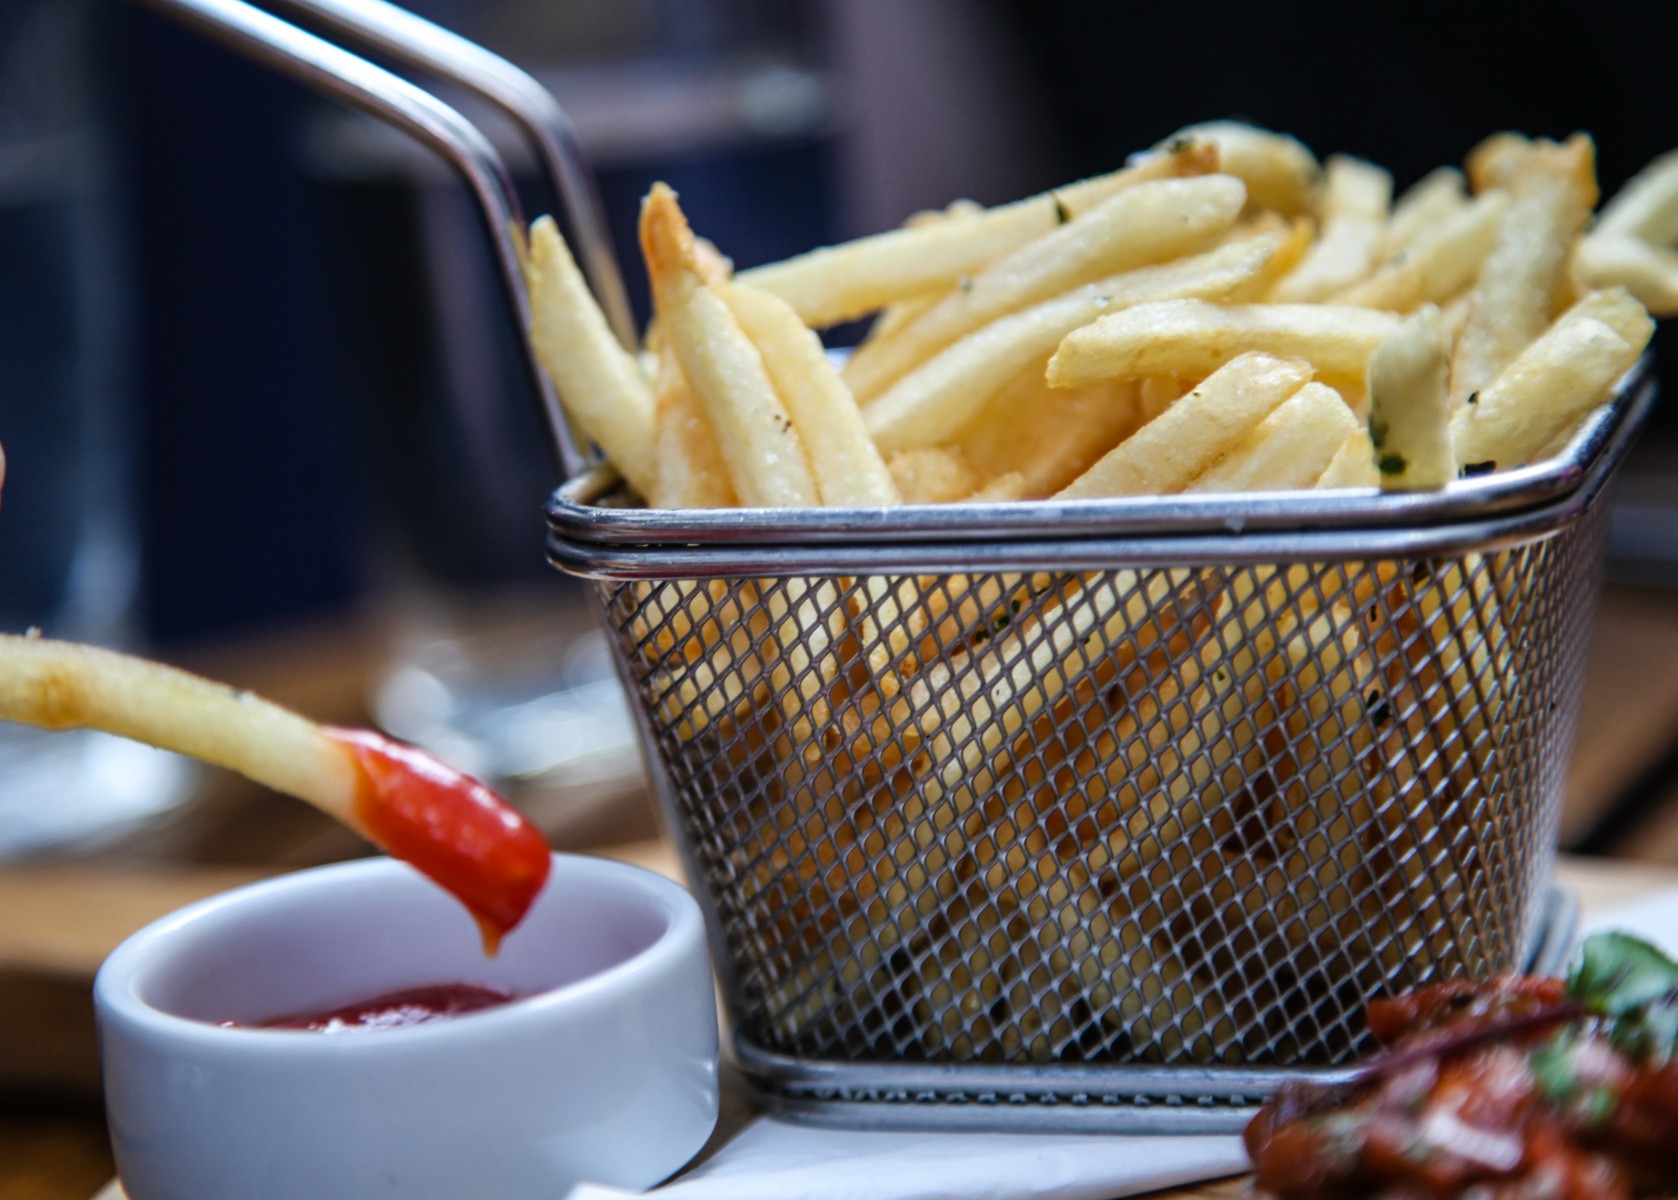 Photo of the hotel Sofitel Los Angeles at Beverly Hills: Fries